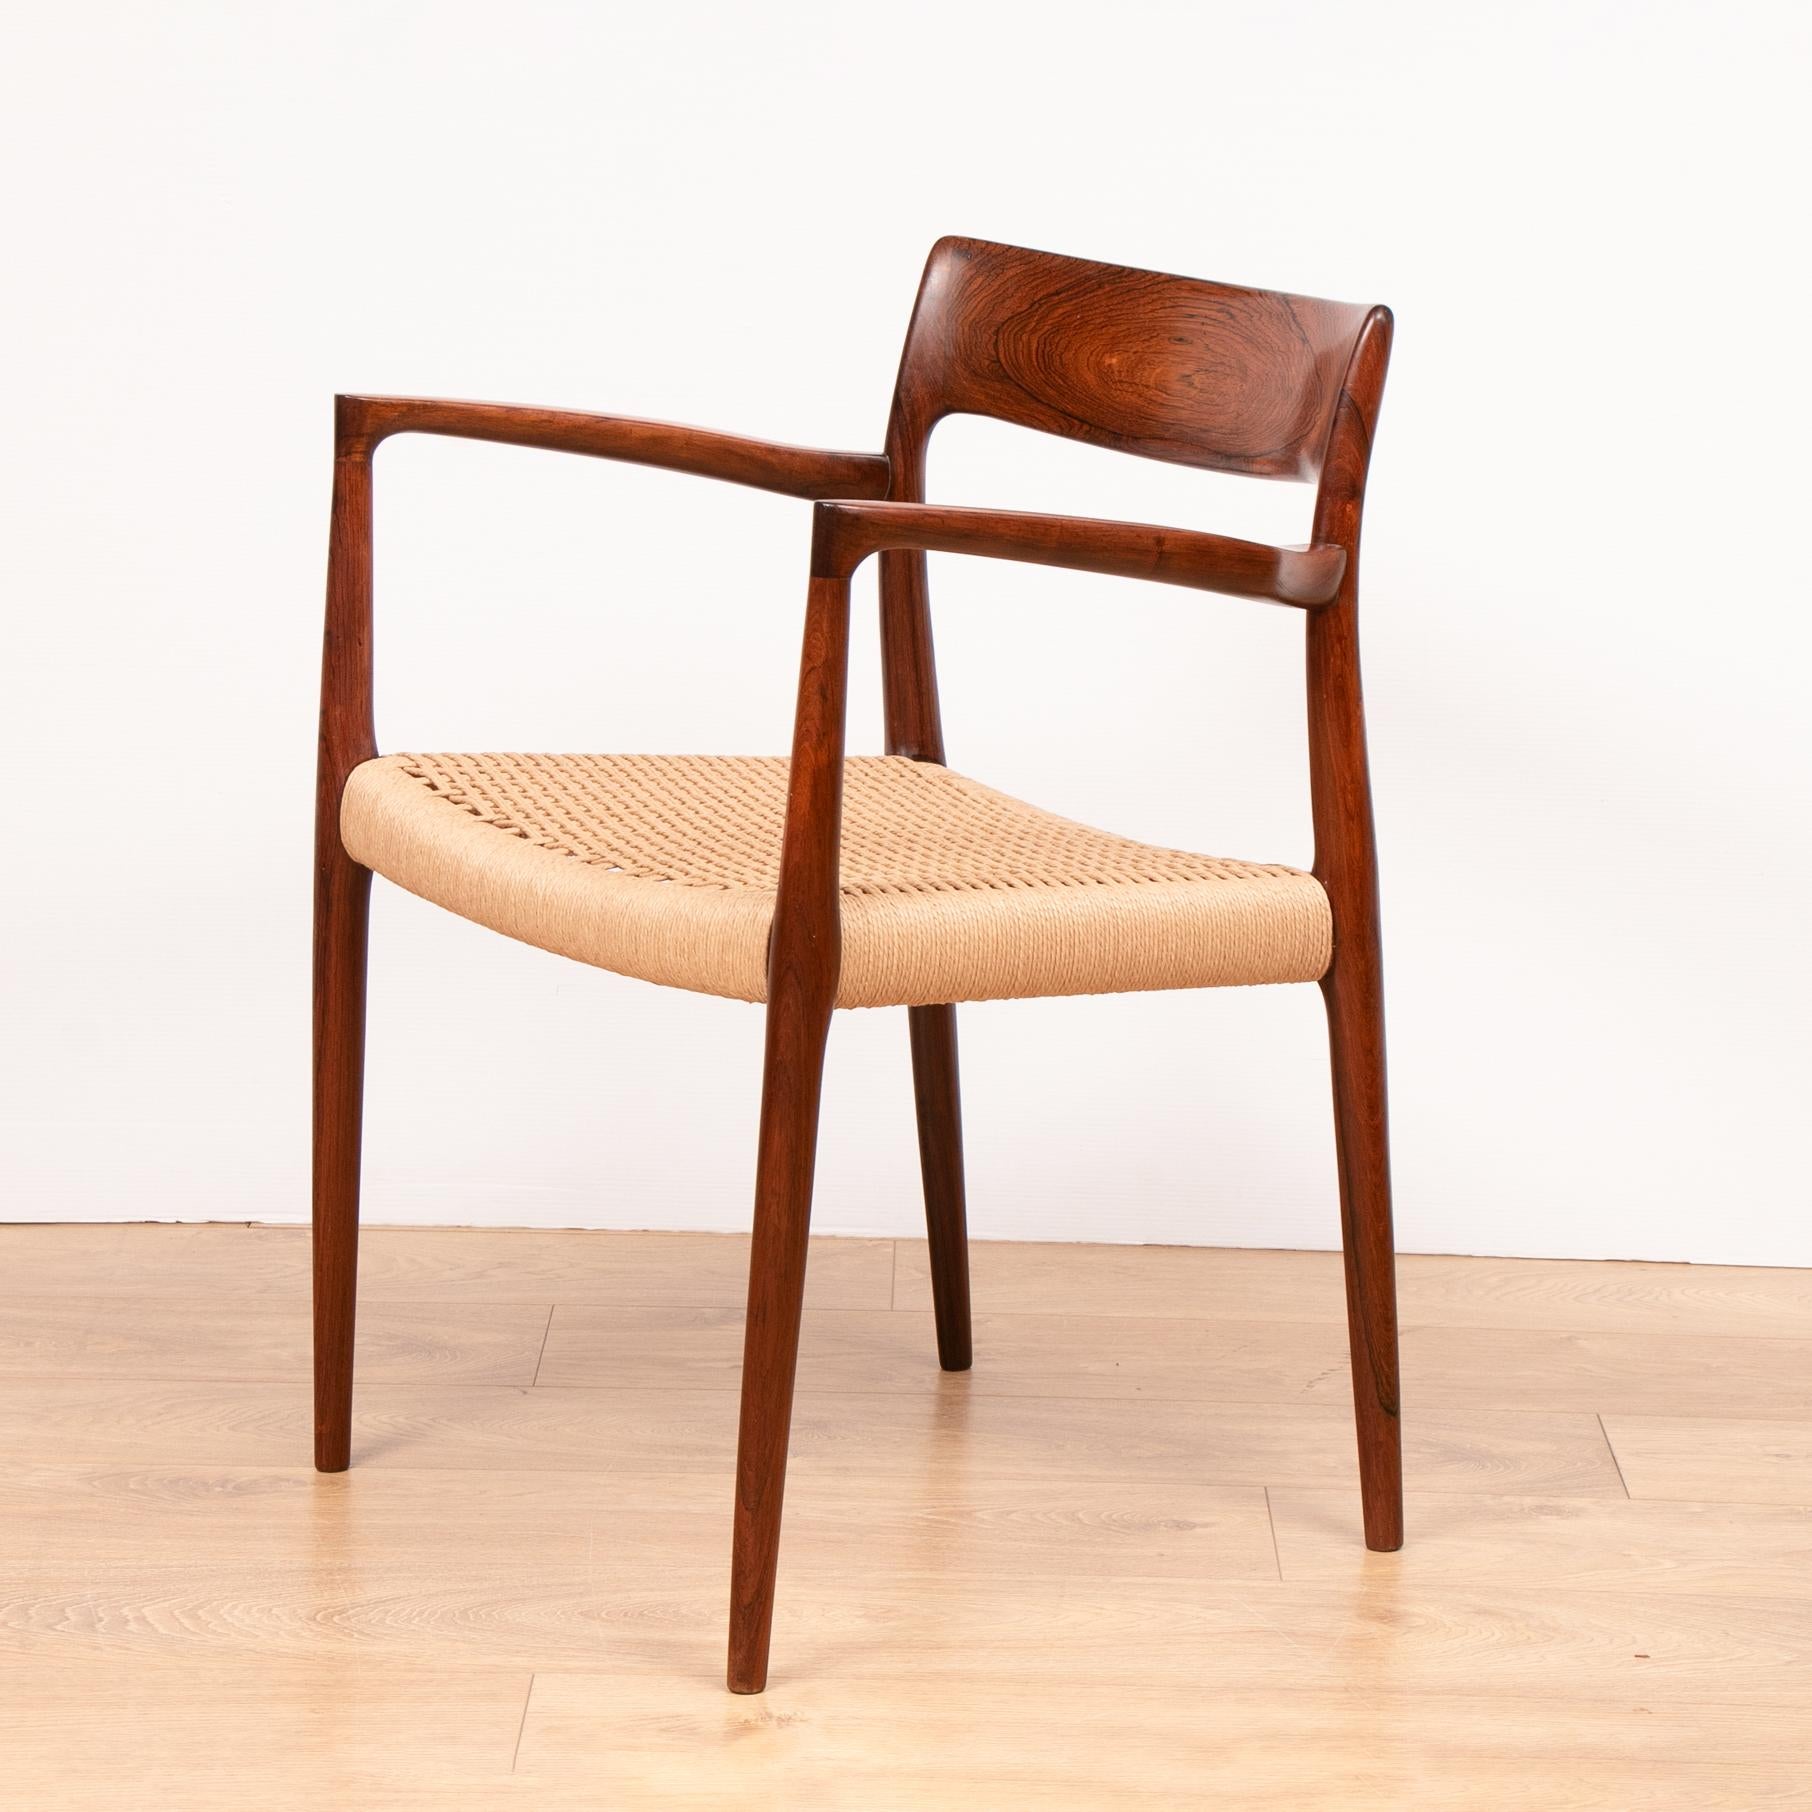 Pair of solid rosewood armchairs designed by Niels O. Moller and manufactured by J.L. Moller Møbelfabrik, Denmark in 1959. The chairs feature the most beautiful grain specifically on the backrests and arms. The chairs both have matching brand new